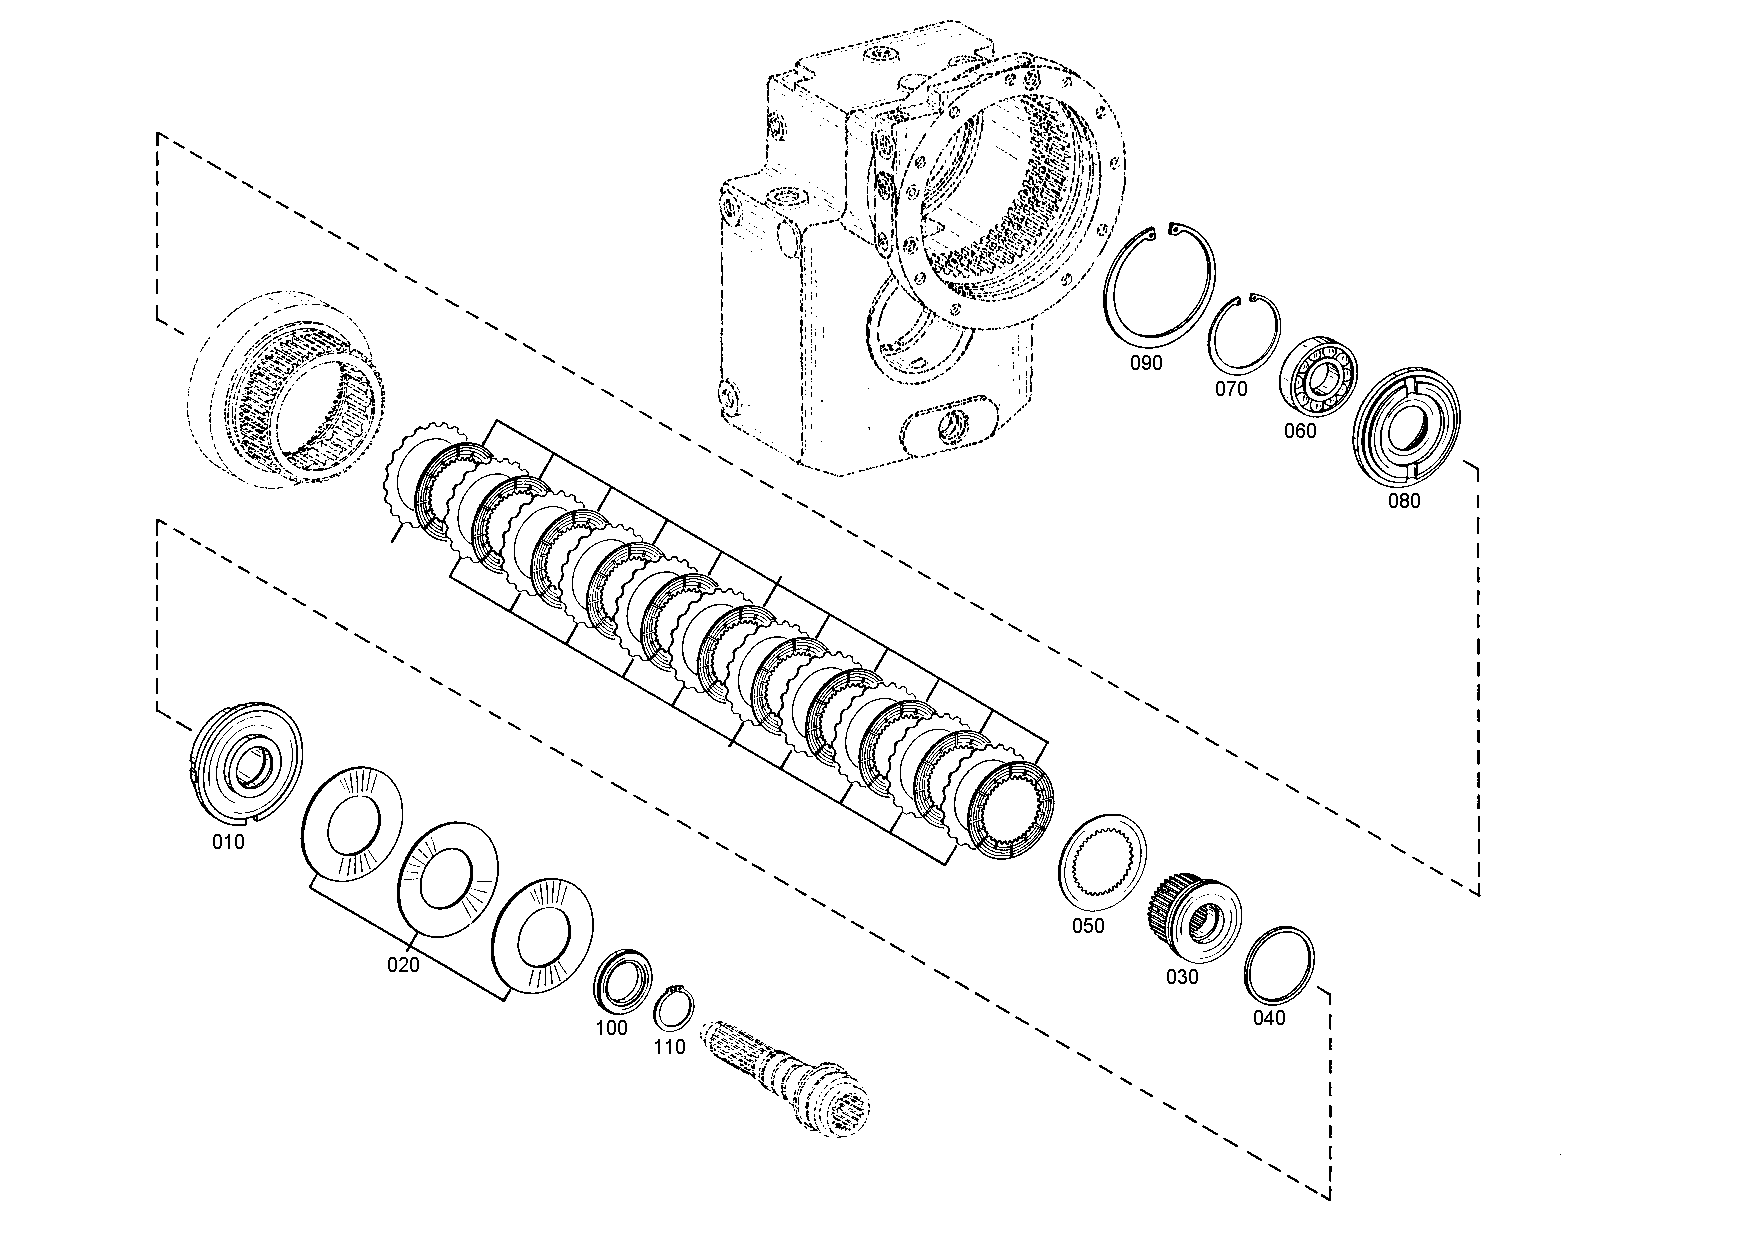 drawing for TEREX EQUIPMENT LIMITED N0036260 - CIRCLIP (figure 2)